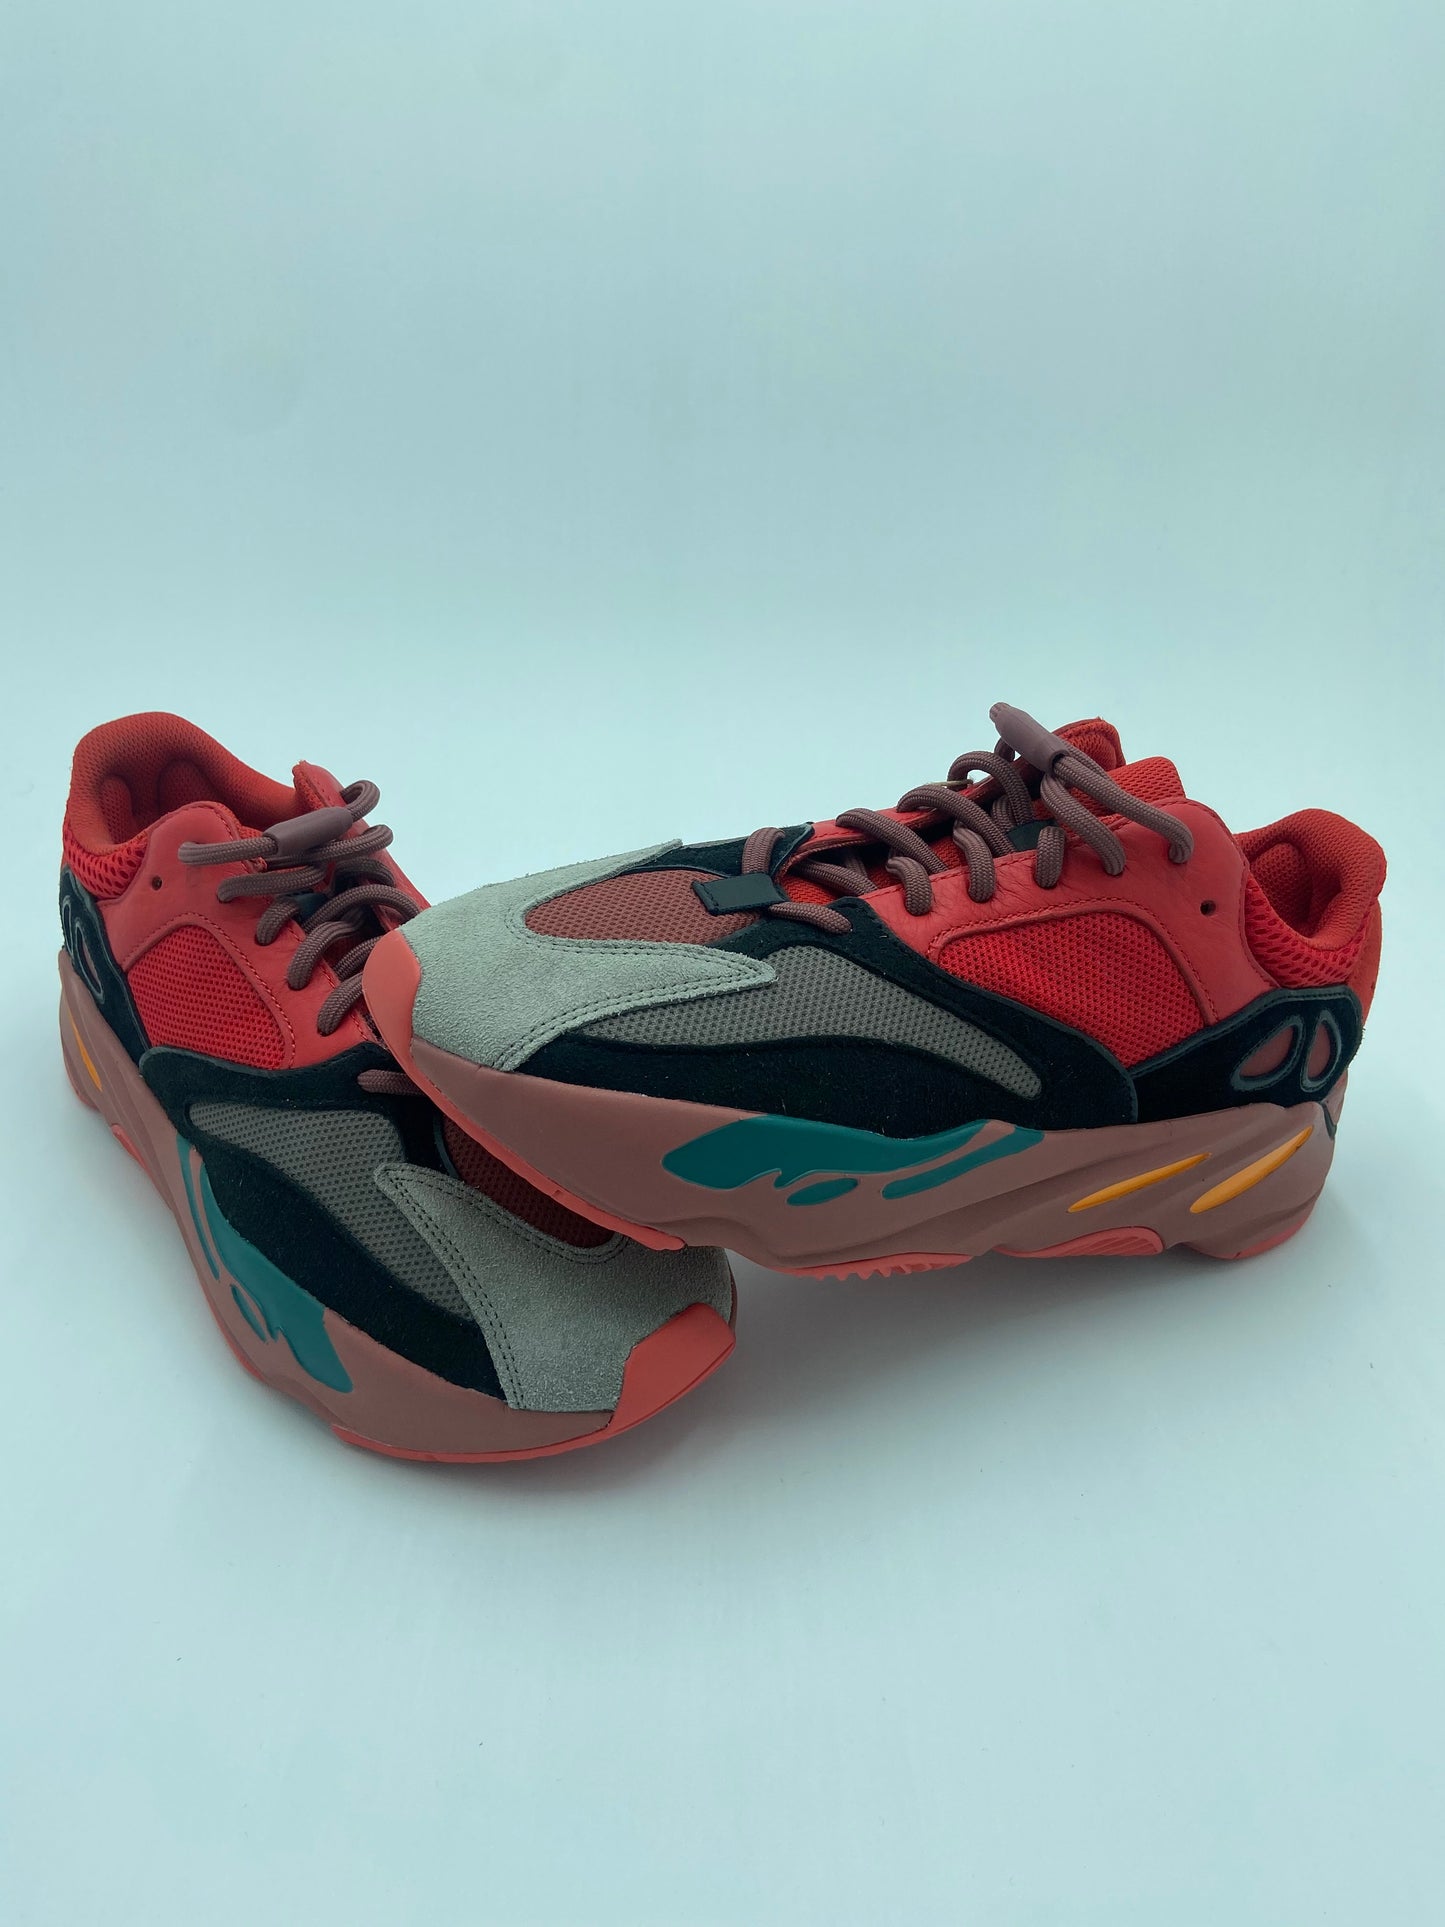 Yeezy Boost 700 Hi-Res Red *No Box*